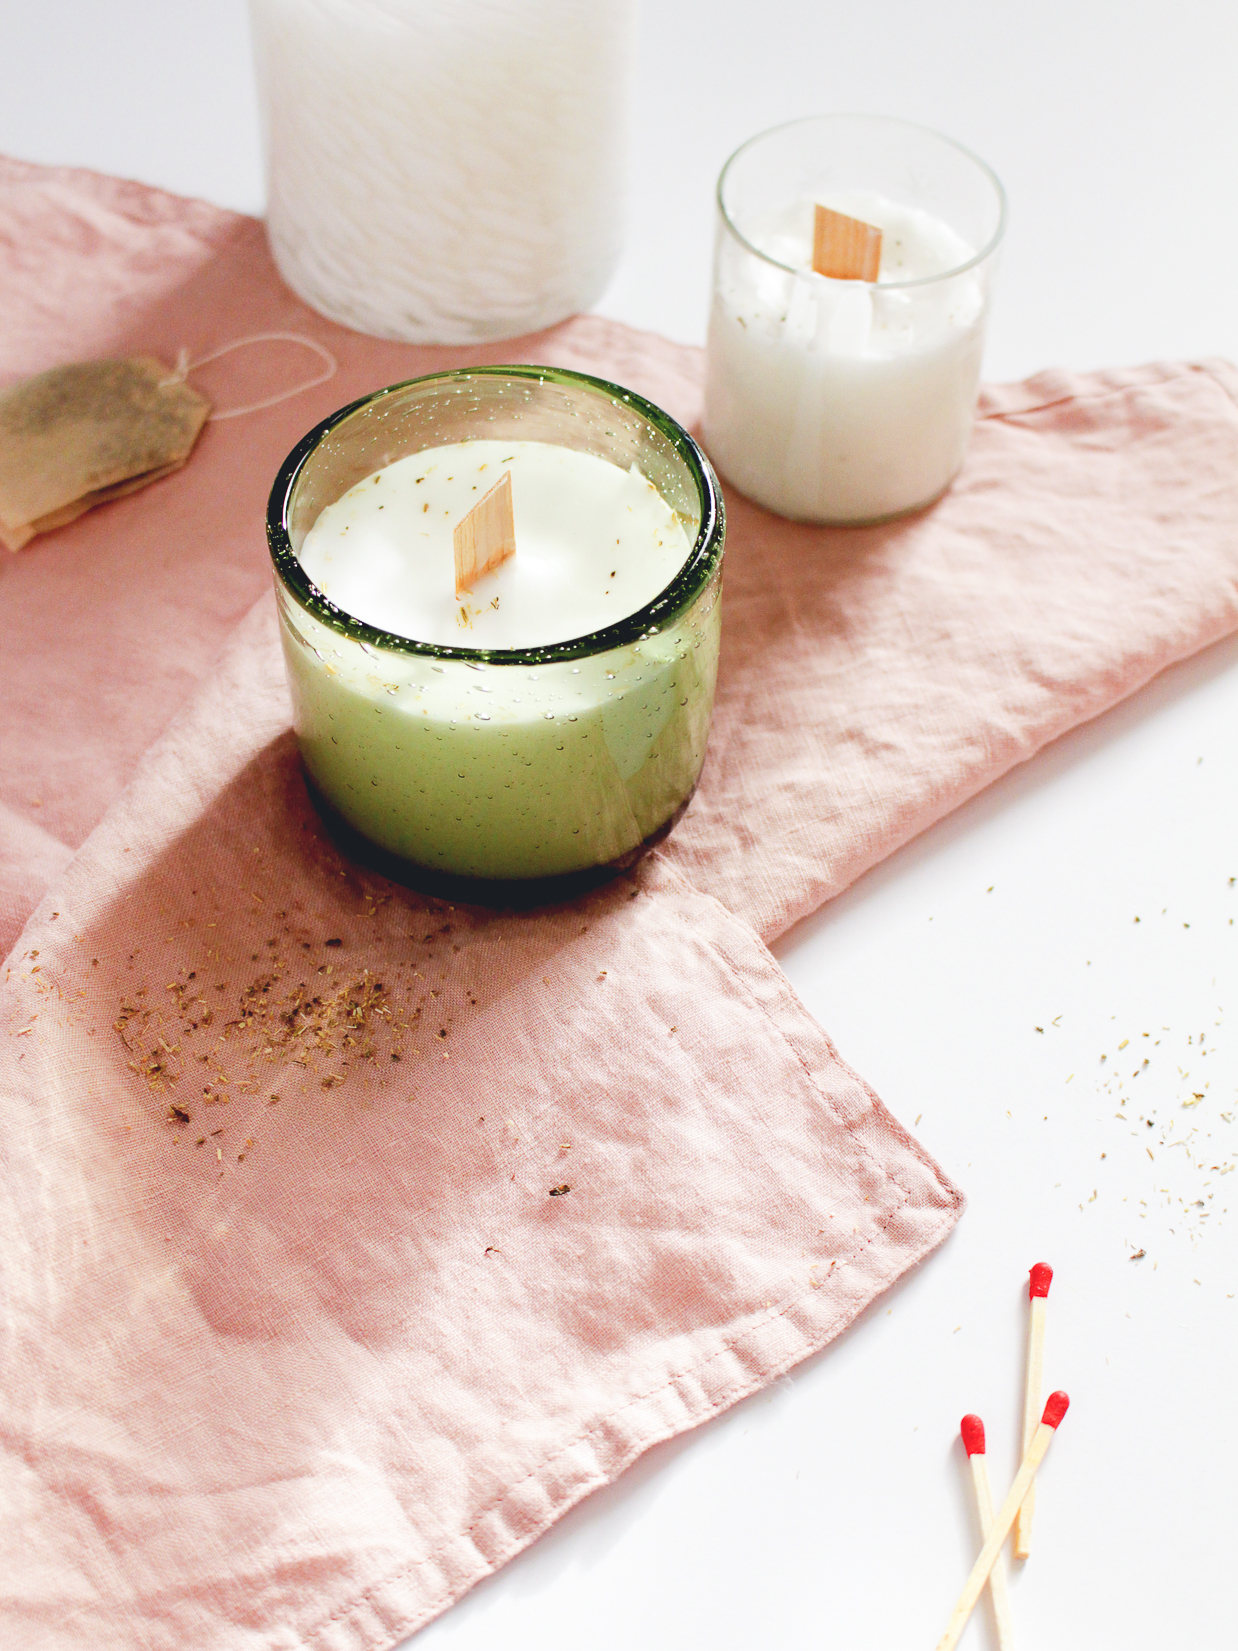 4 DIY Home Decor Projects to Try: DIY Tea Scented Candles on Martha Stewart | Fish & Bull